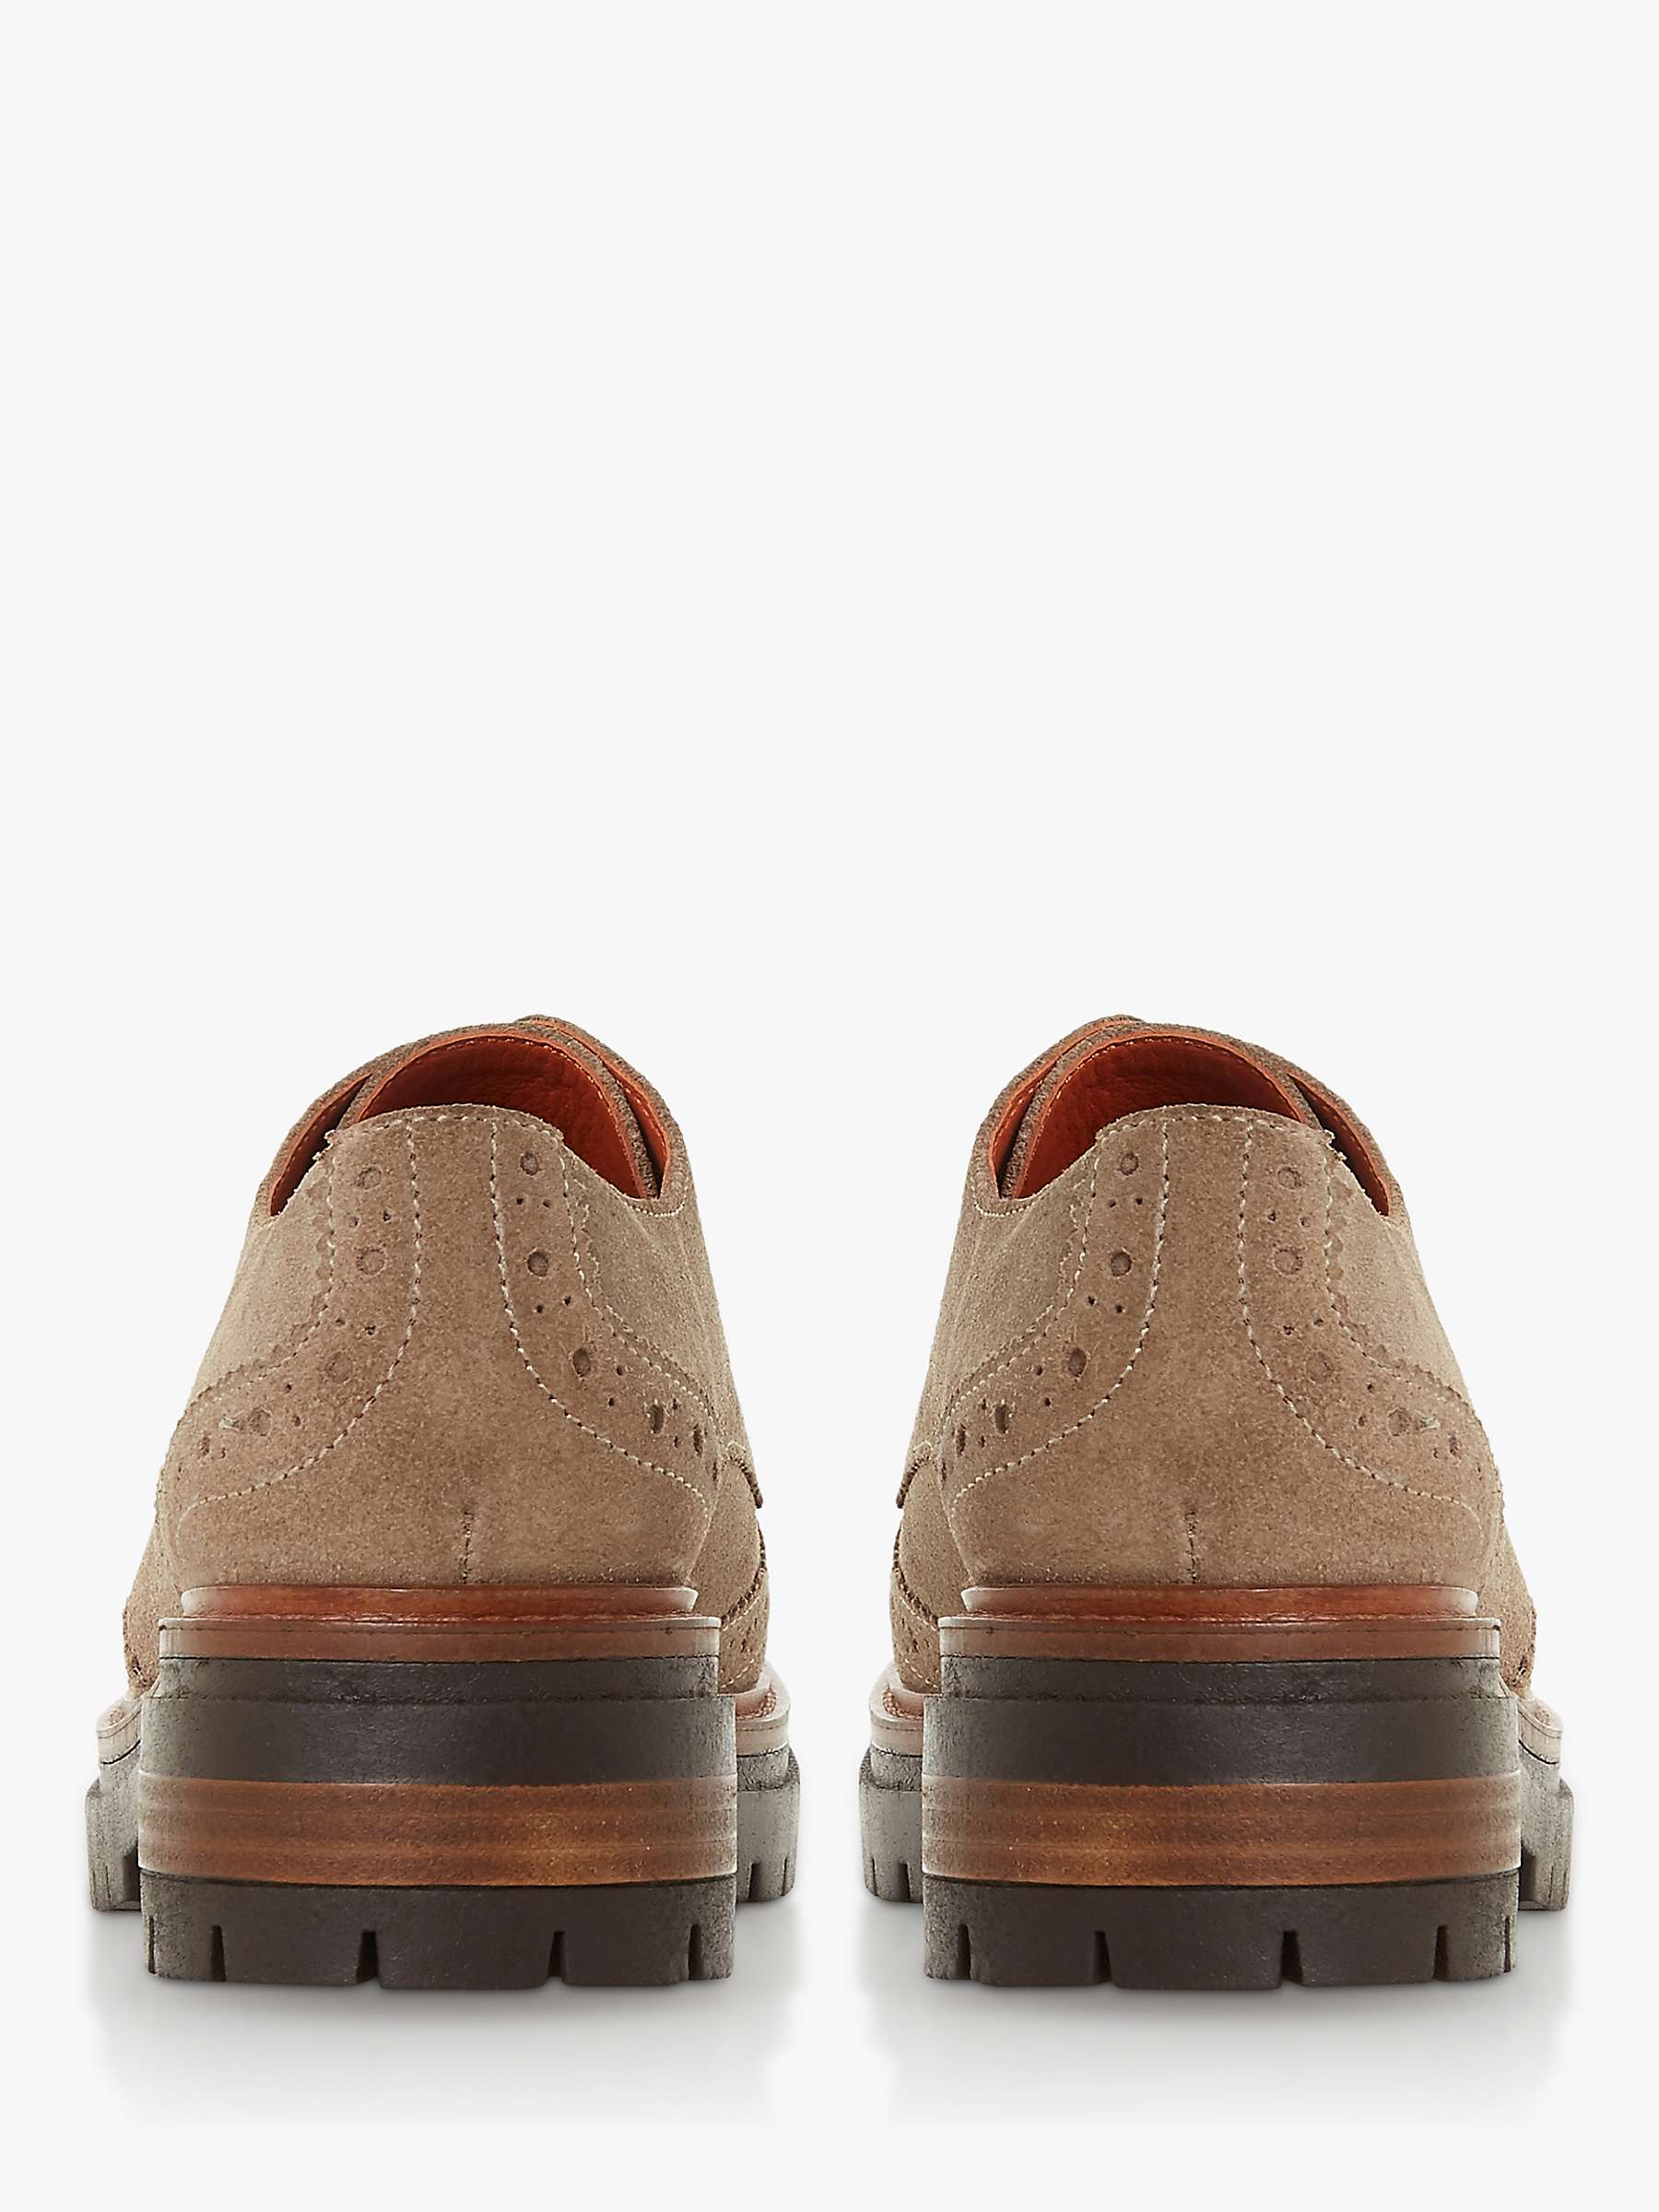 Buy Bertie Fantasy Suede Lace Up Brogues, Taupe Online at johnlewis.com